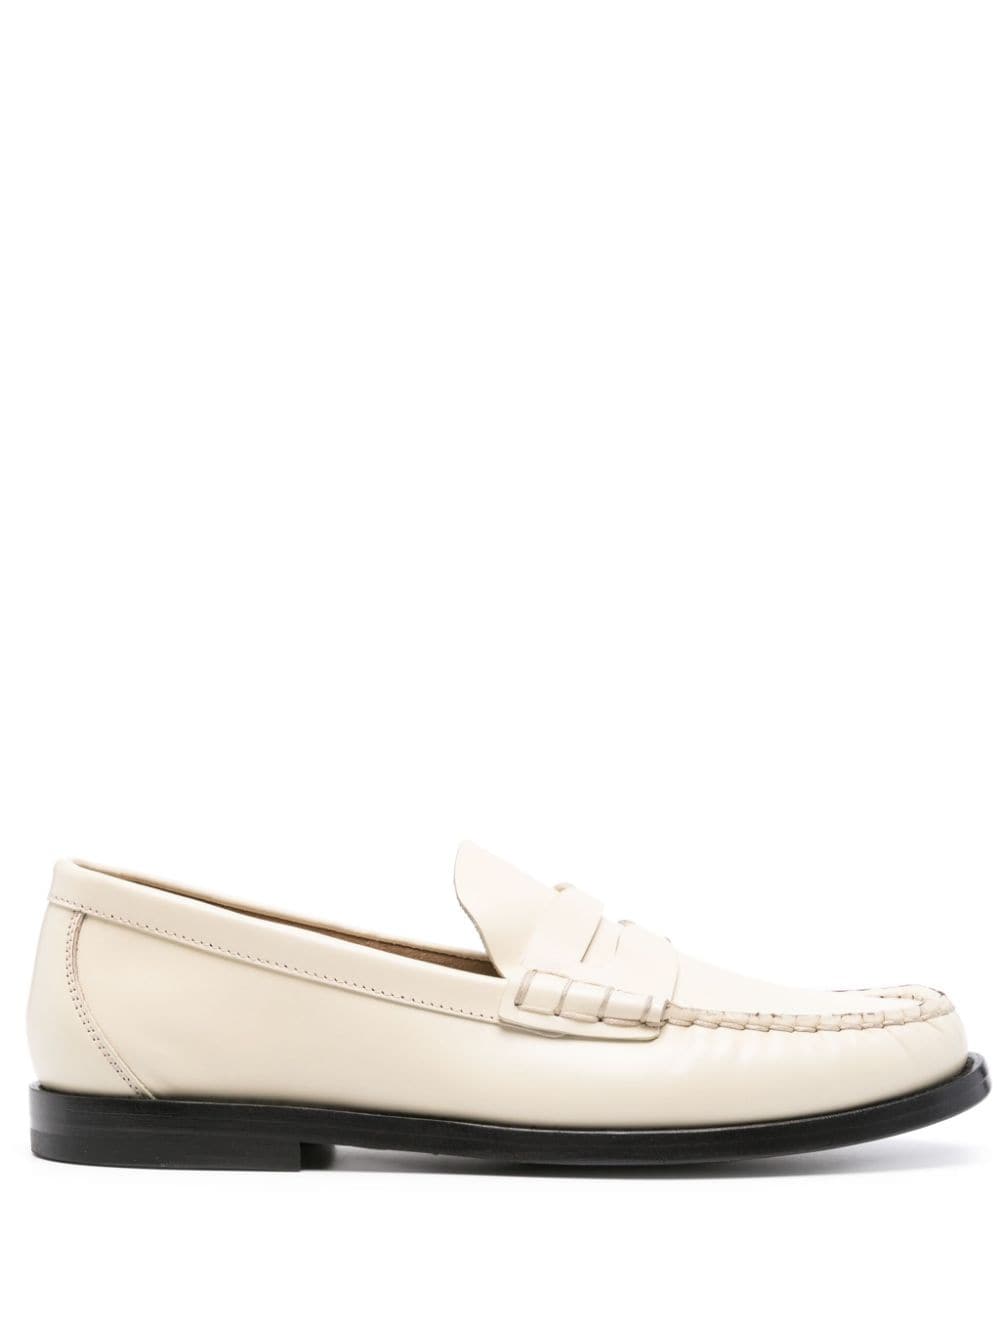 Zivago leather loafers